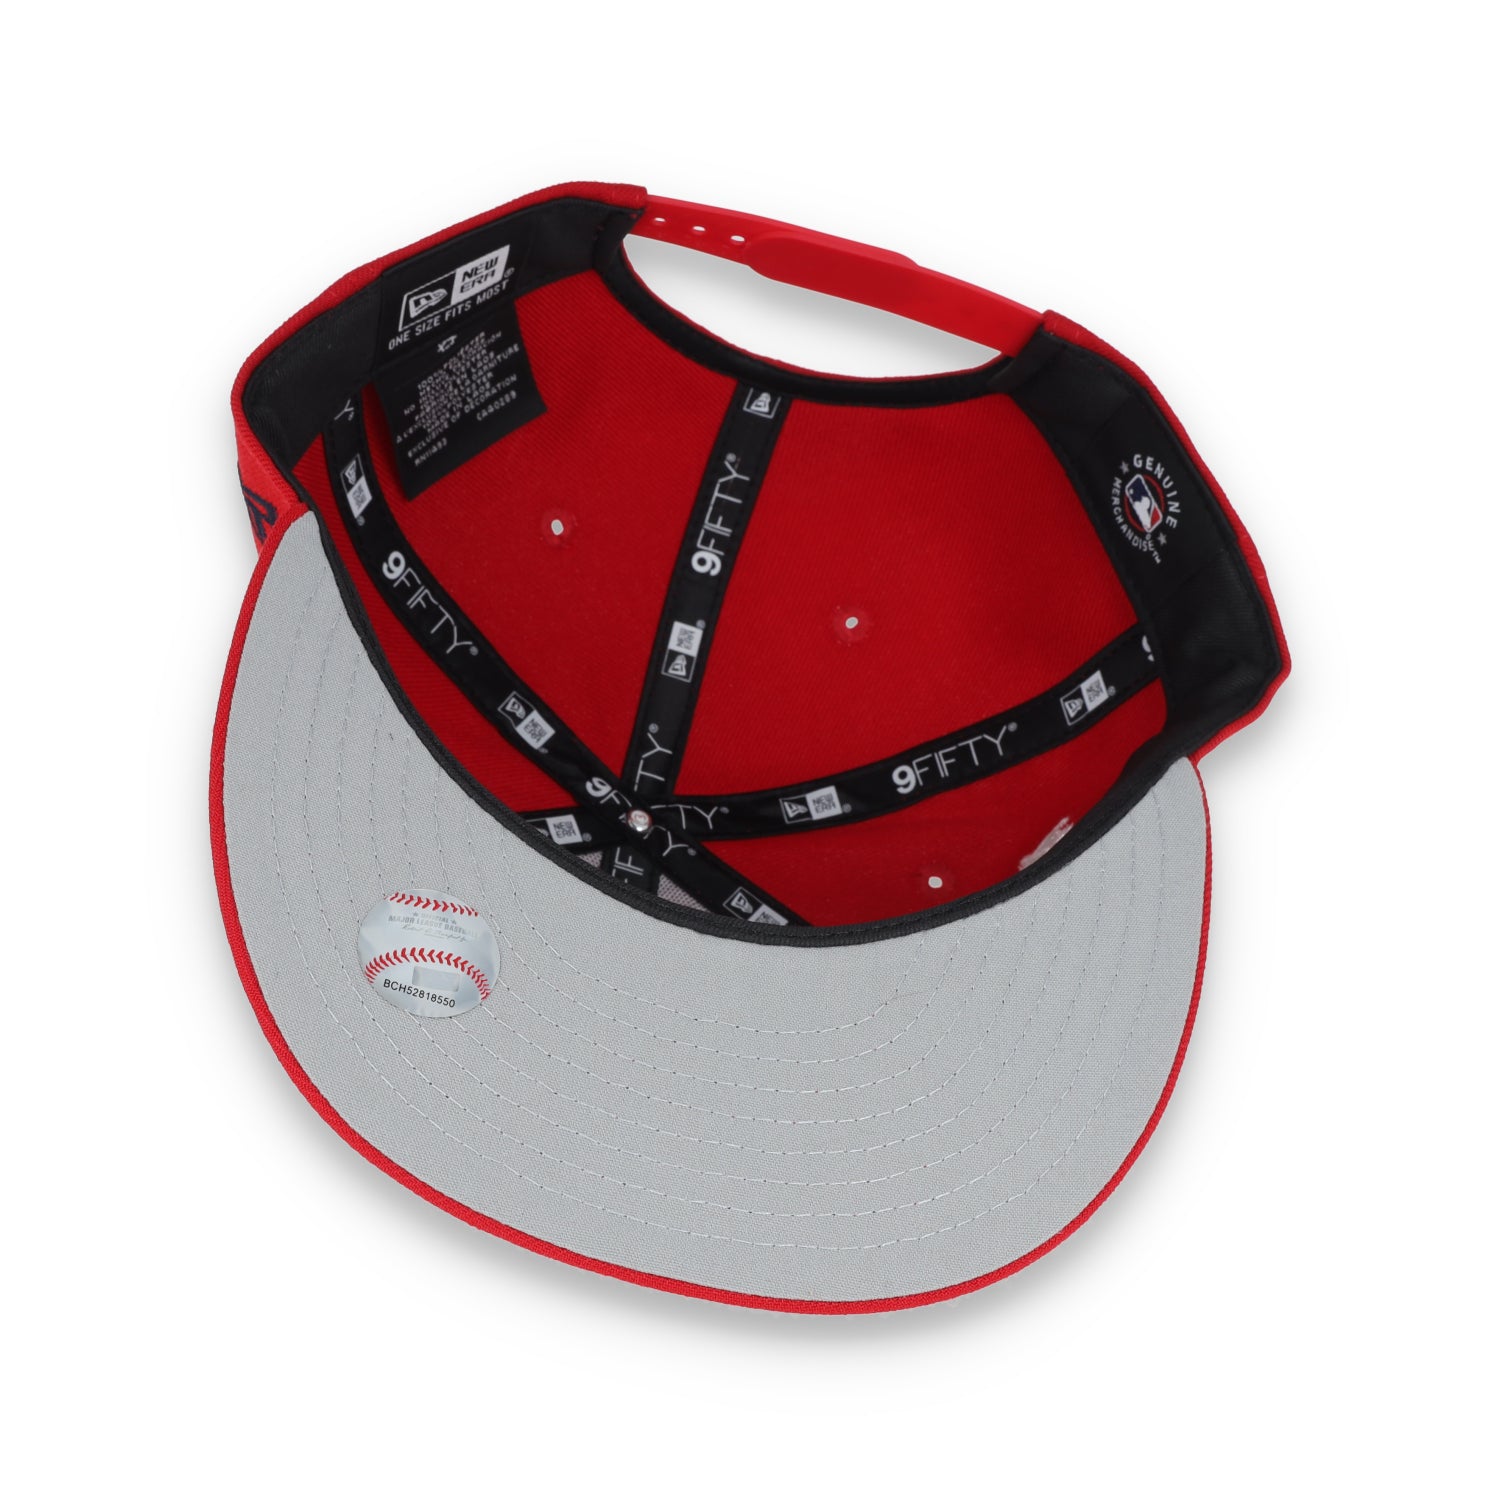 New Era St Louis Cardinals Icon E1 9Fifty Snapback Hat-Red